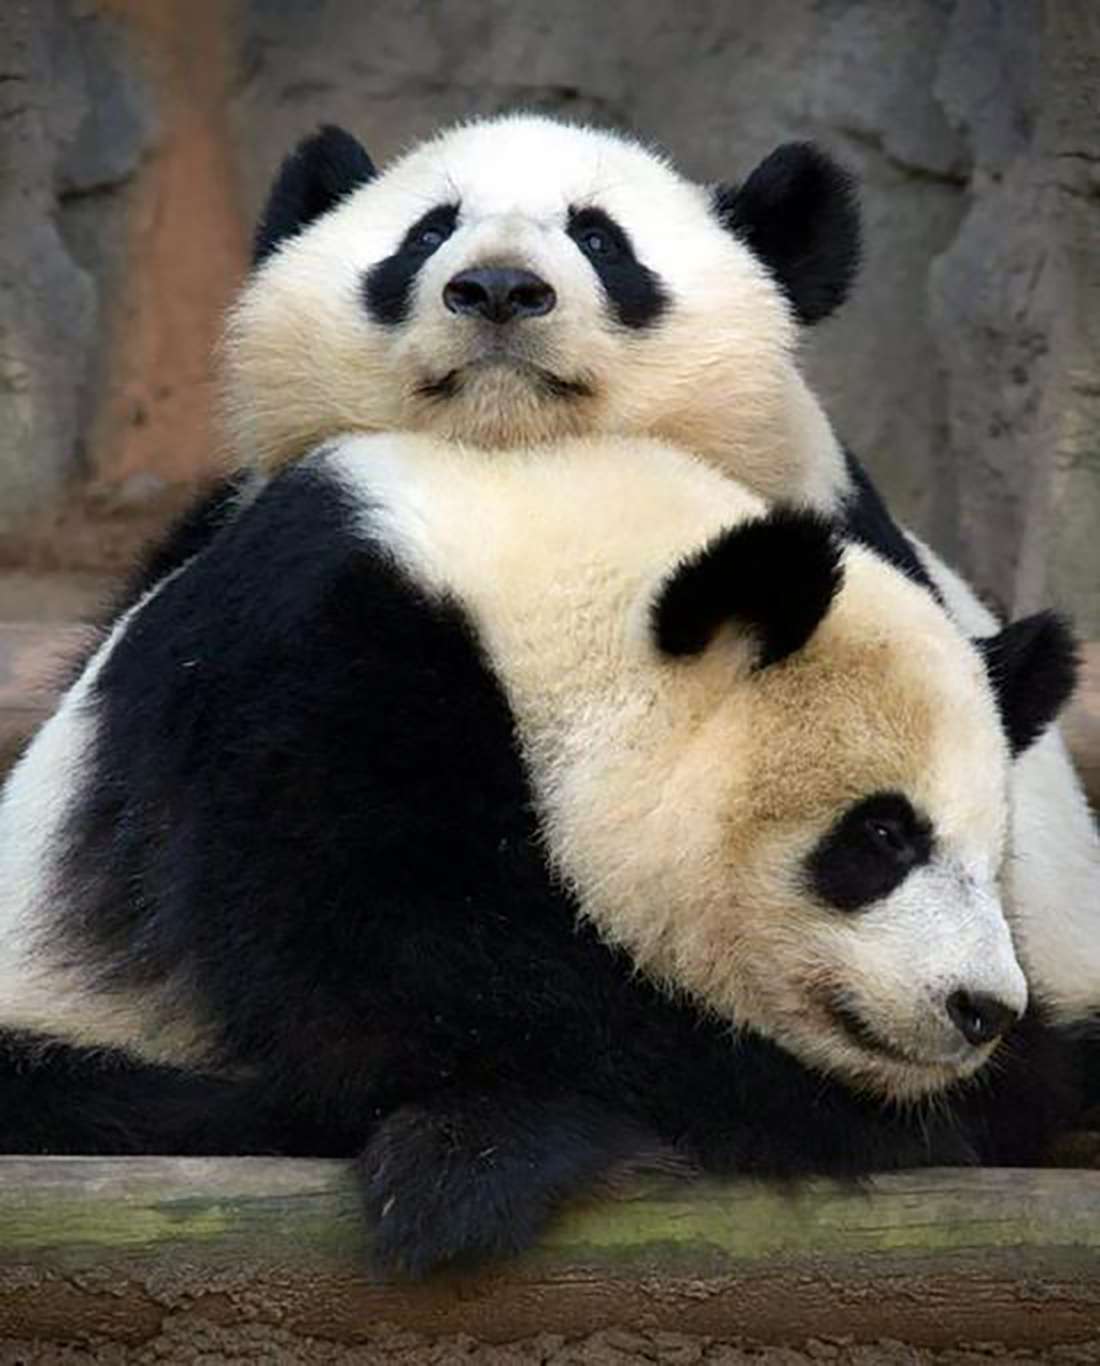 One of the young pandas brought back to China. Photo: Sina.com.cn